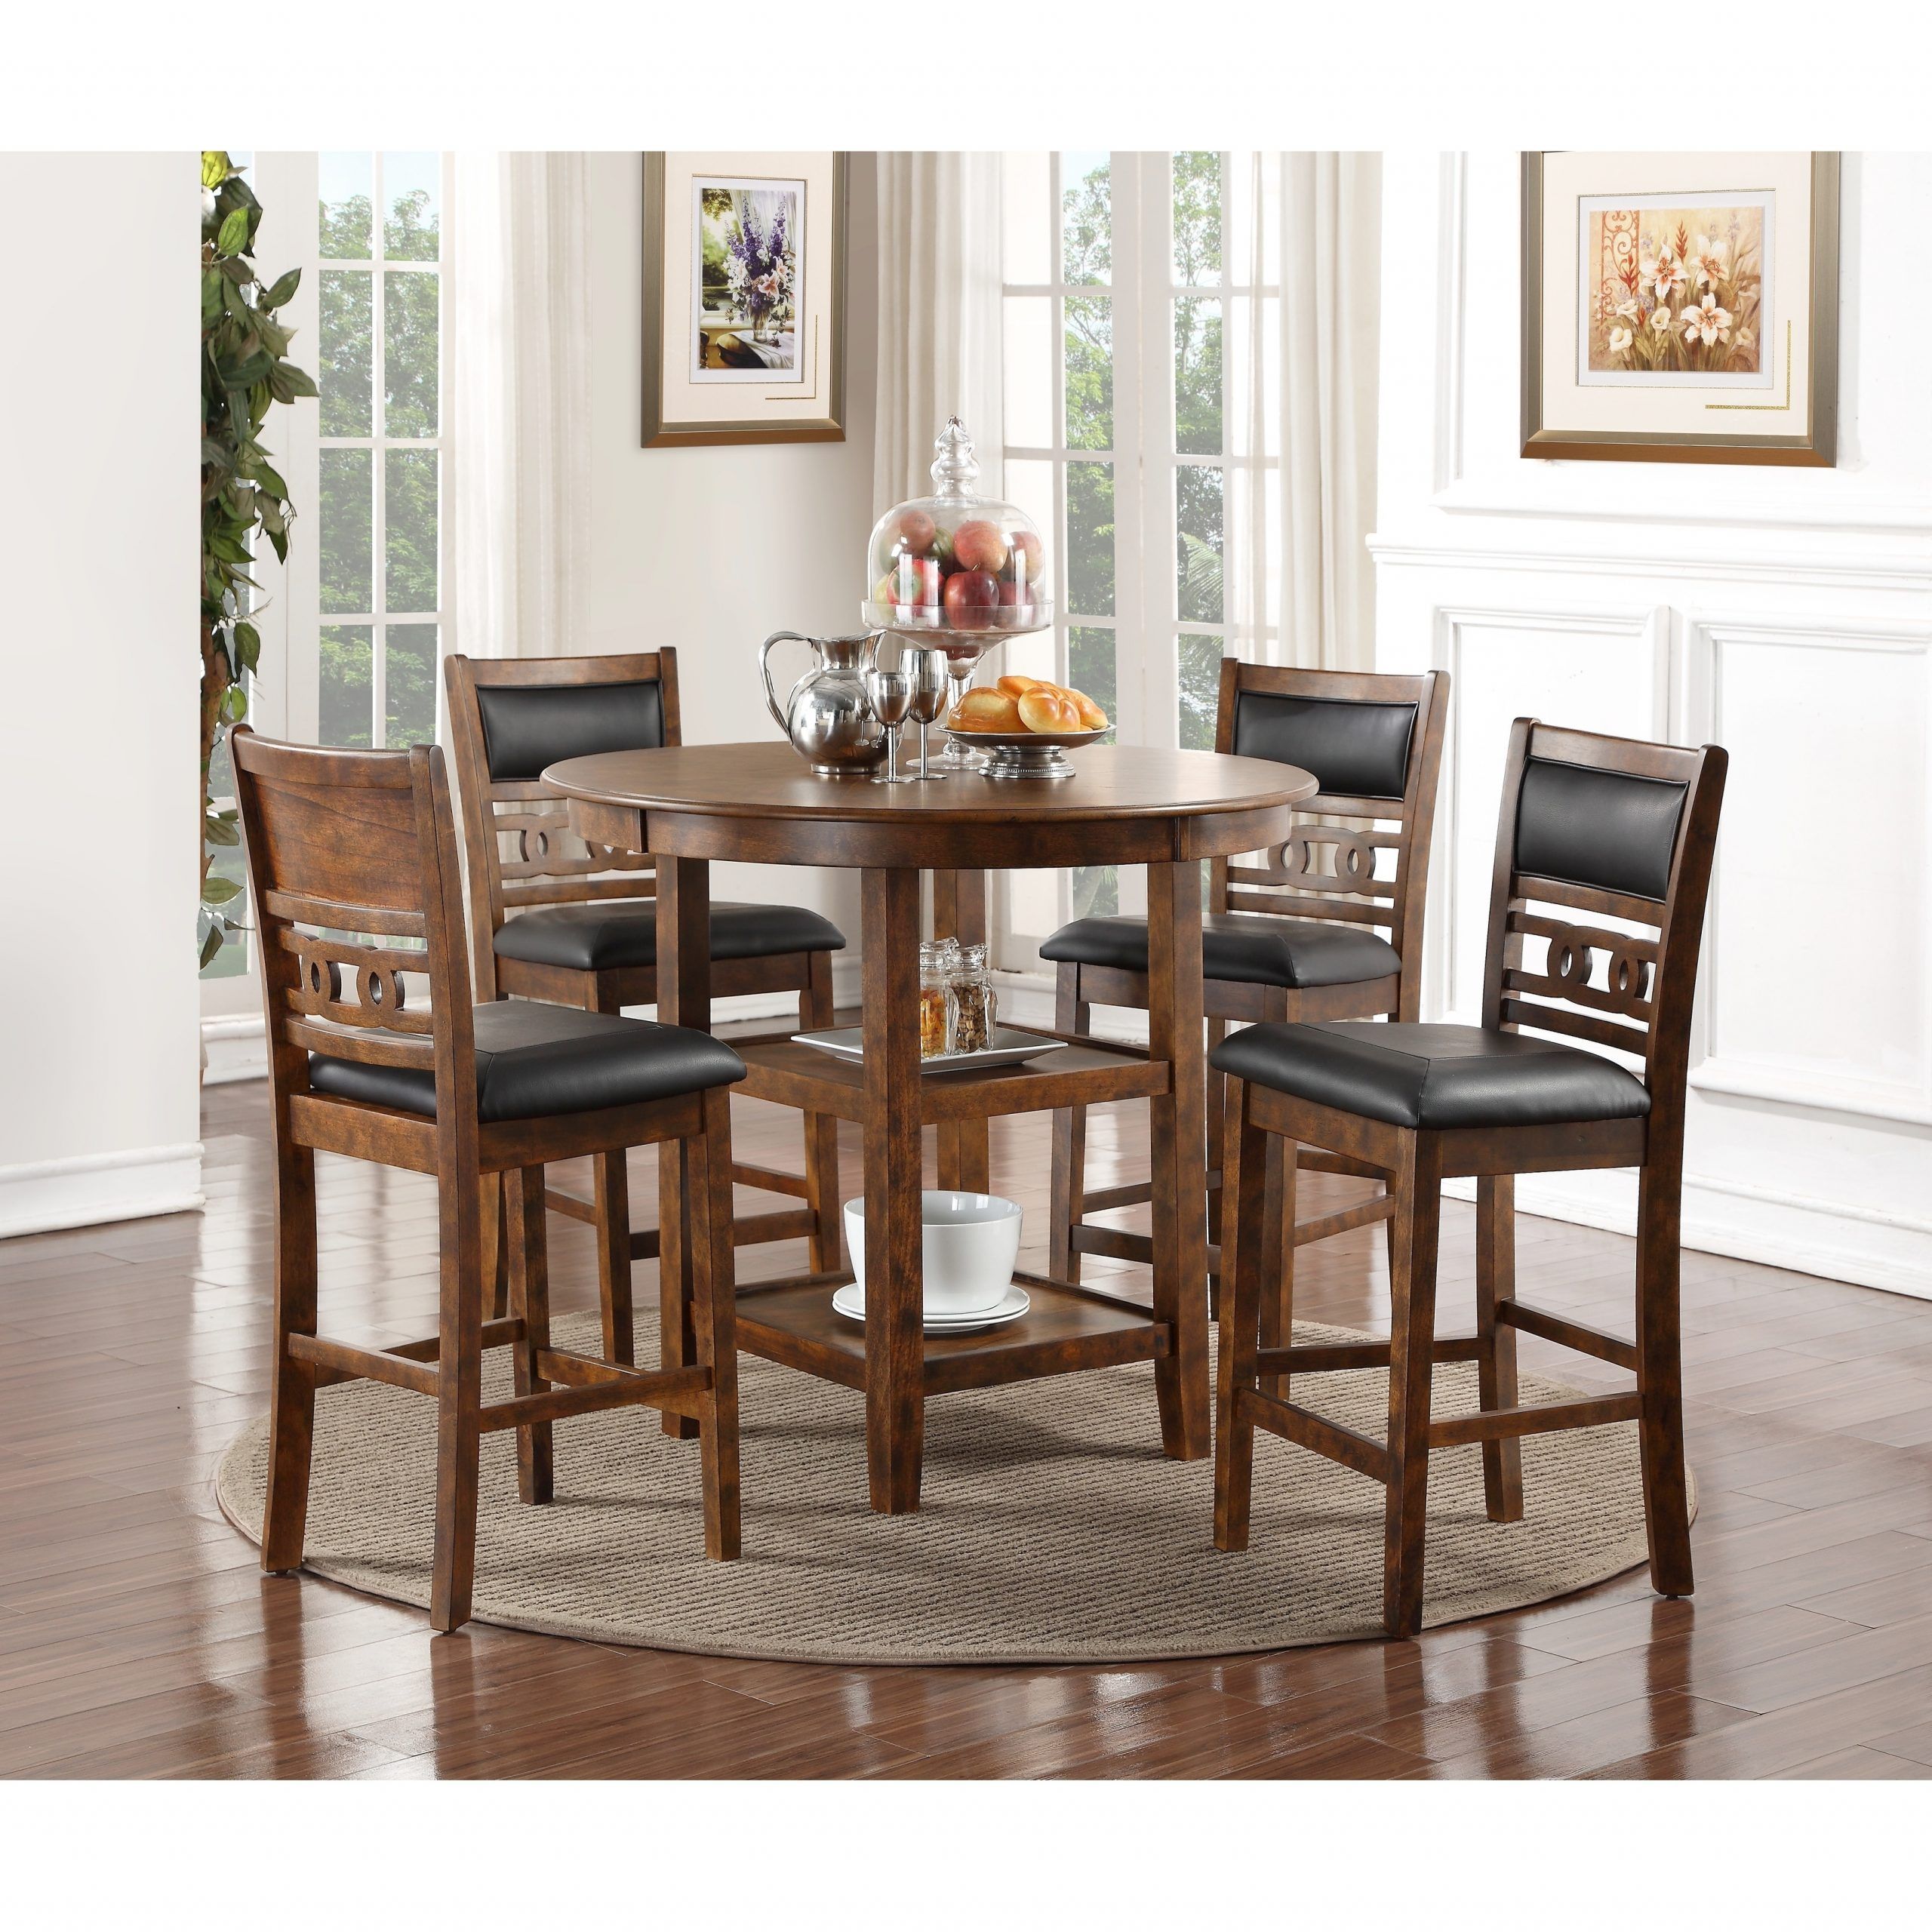 Copper Grove Creteil 5 Piece Round Dining Table Set Brown With Regard To Most Recently Released Vintage Brown 48 Inch Round Dining Tables (View 6 of 15)